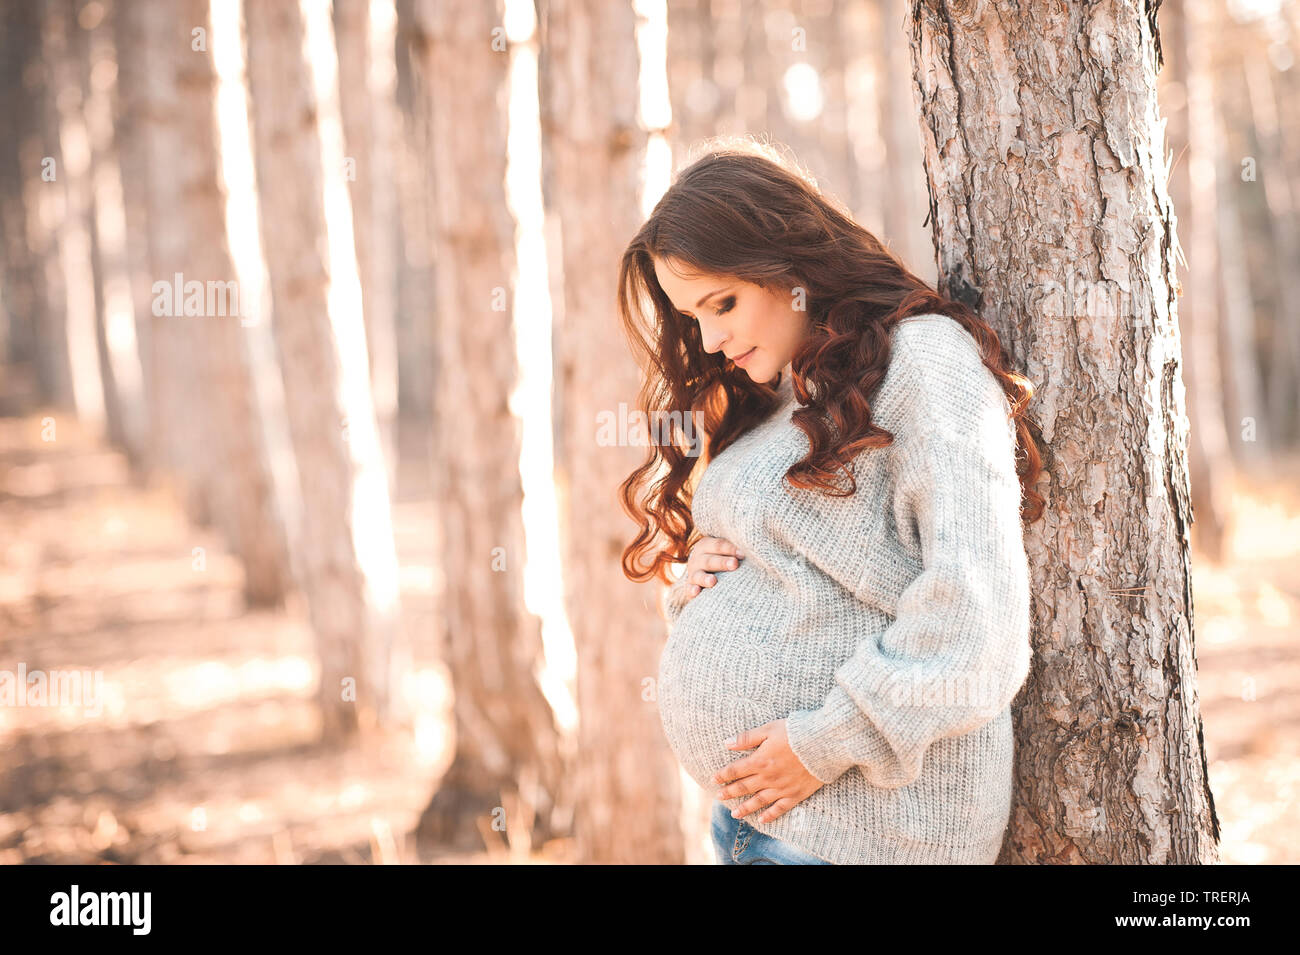 Smiling stylish pregnant woman 30-34 year old wearing knitted sweater in park. Autumn season. Stock Photo